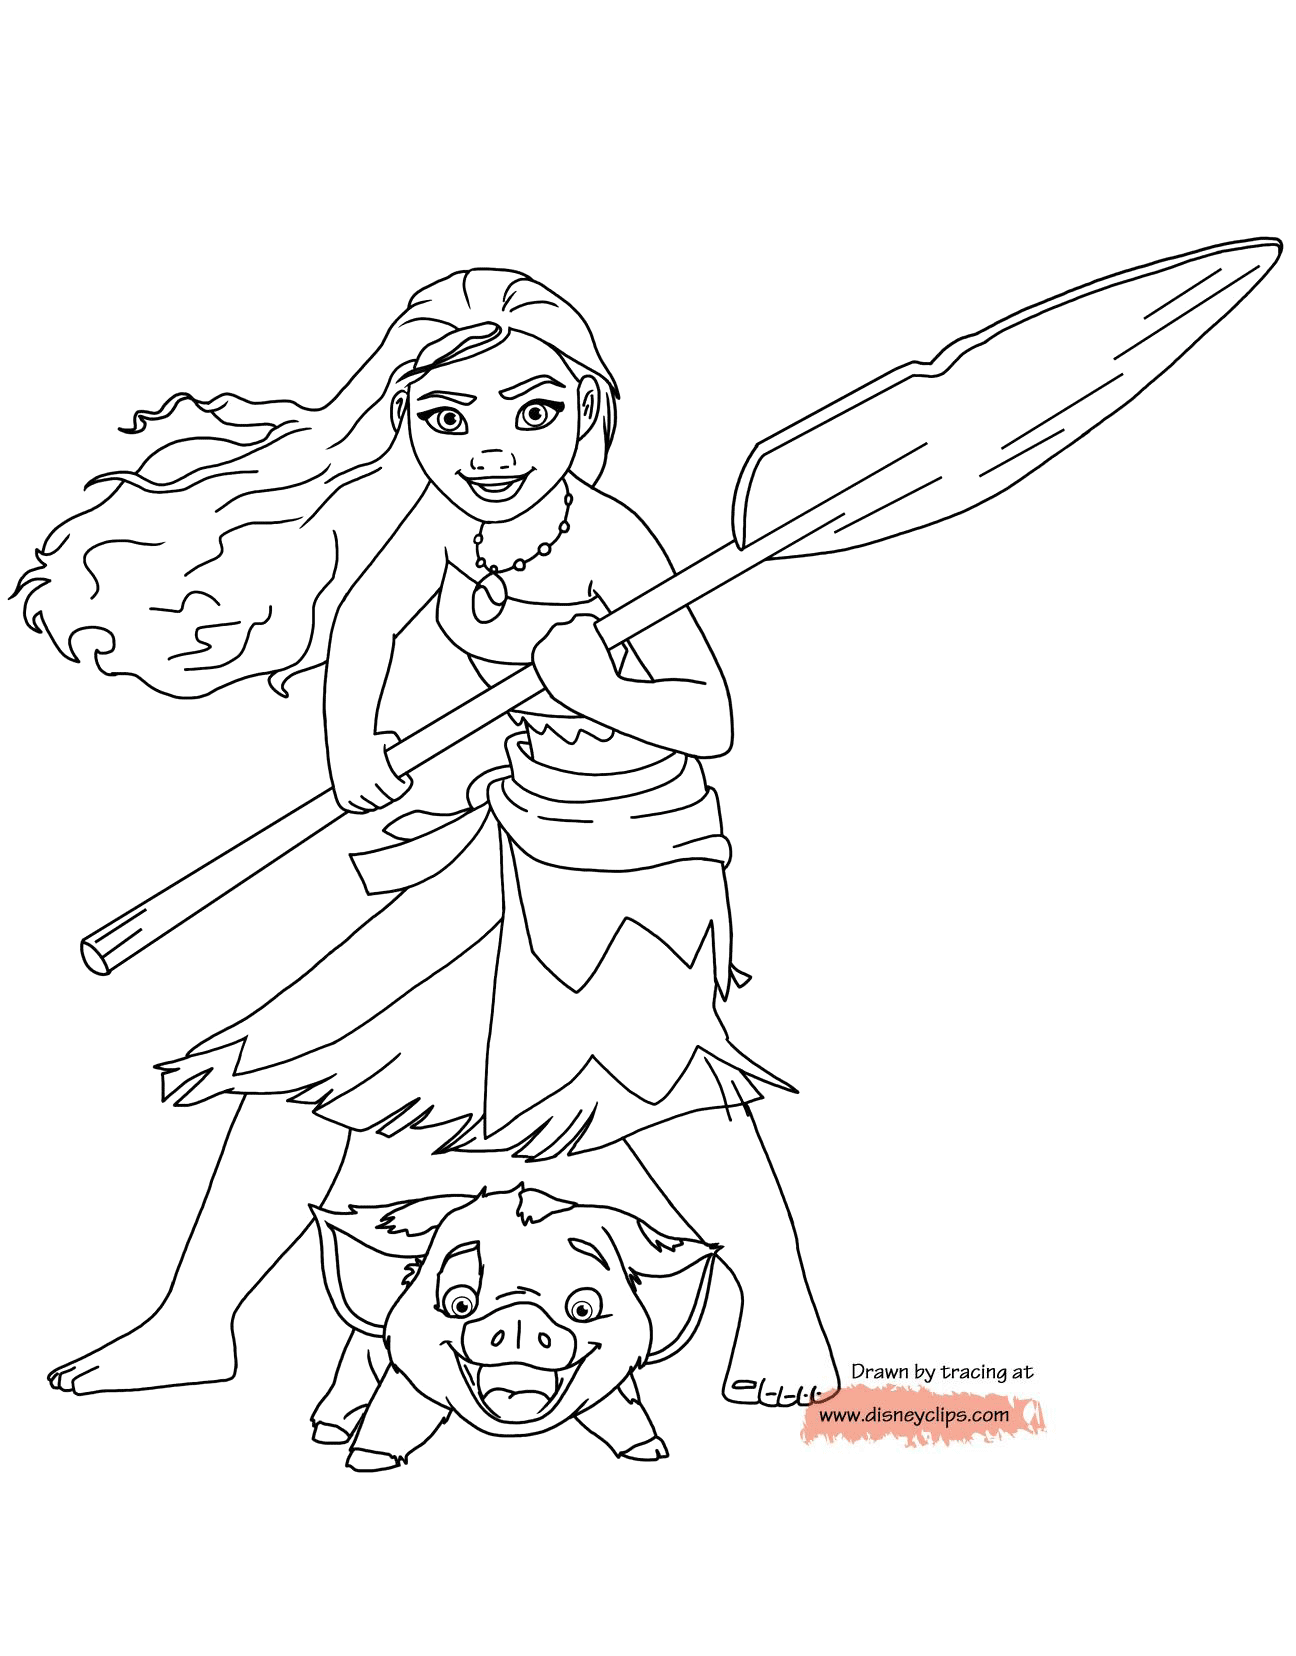 Download Disney S Moana Coloring Pages Disneyclips Com